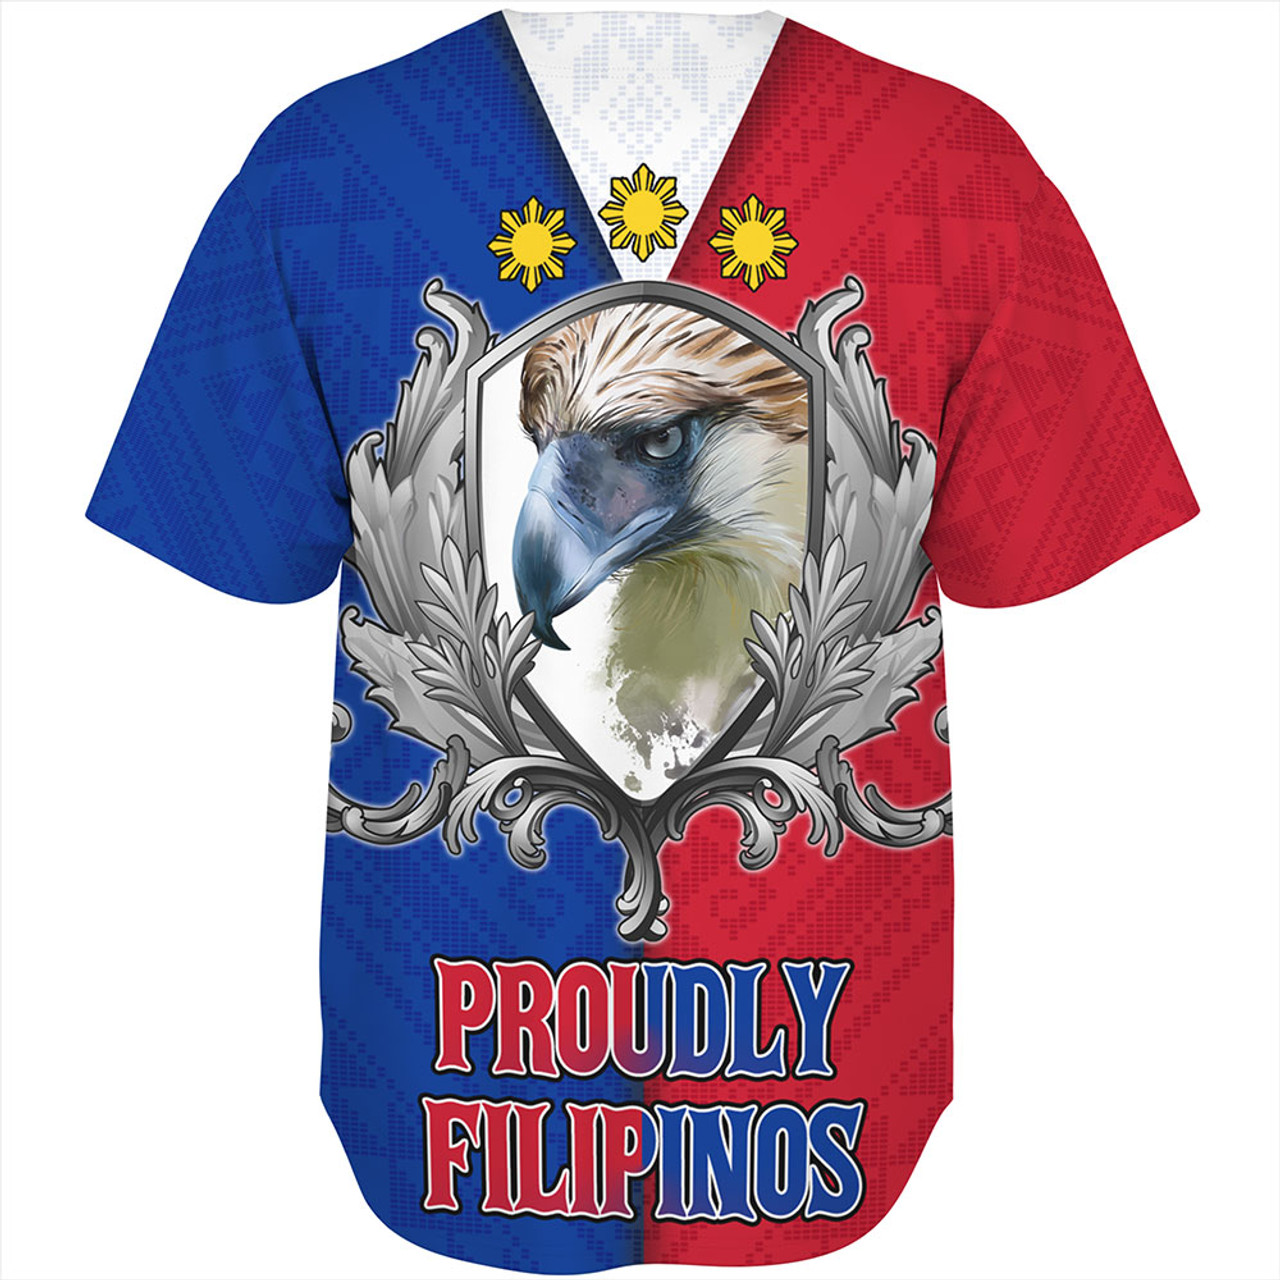 Philippines Filipinos Baseball Shirt The Philippine Eagle With Traditional Patterns